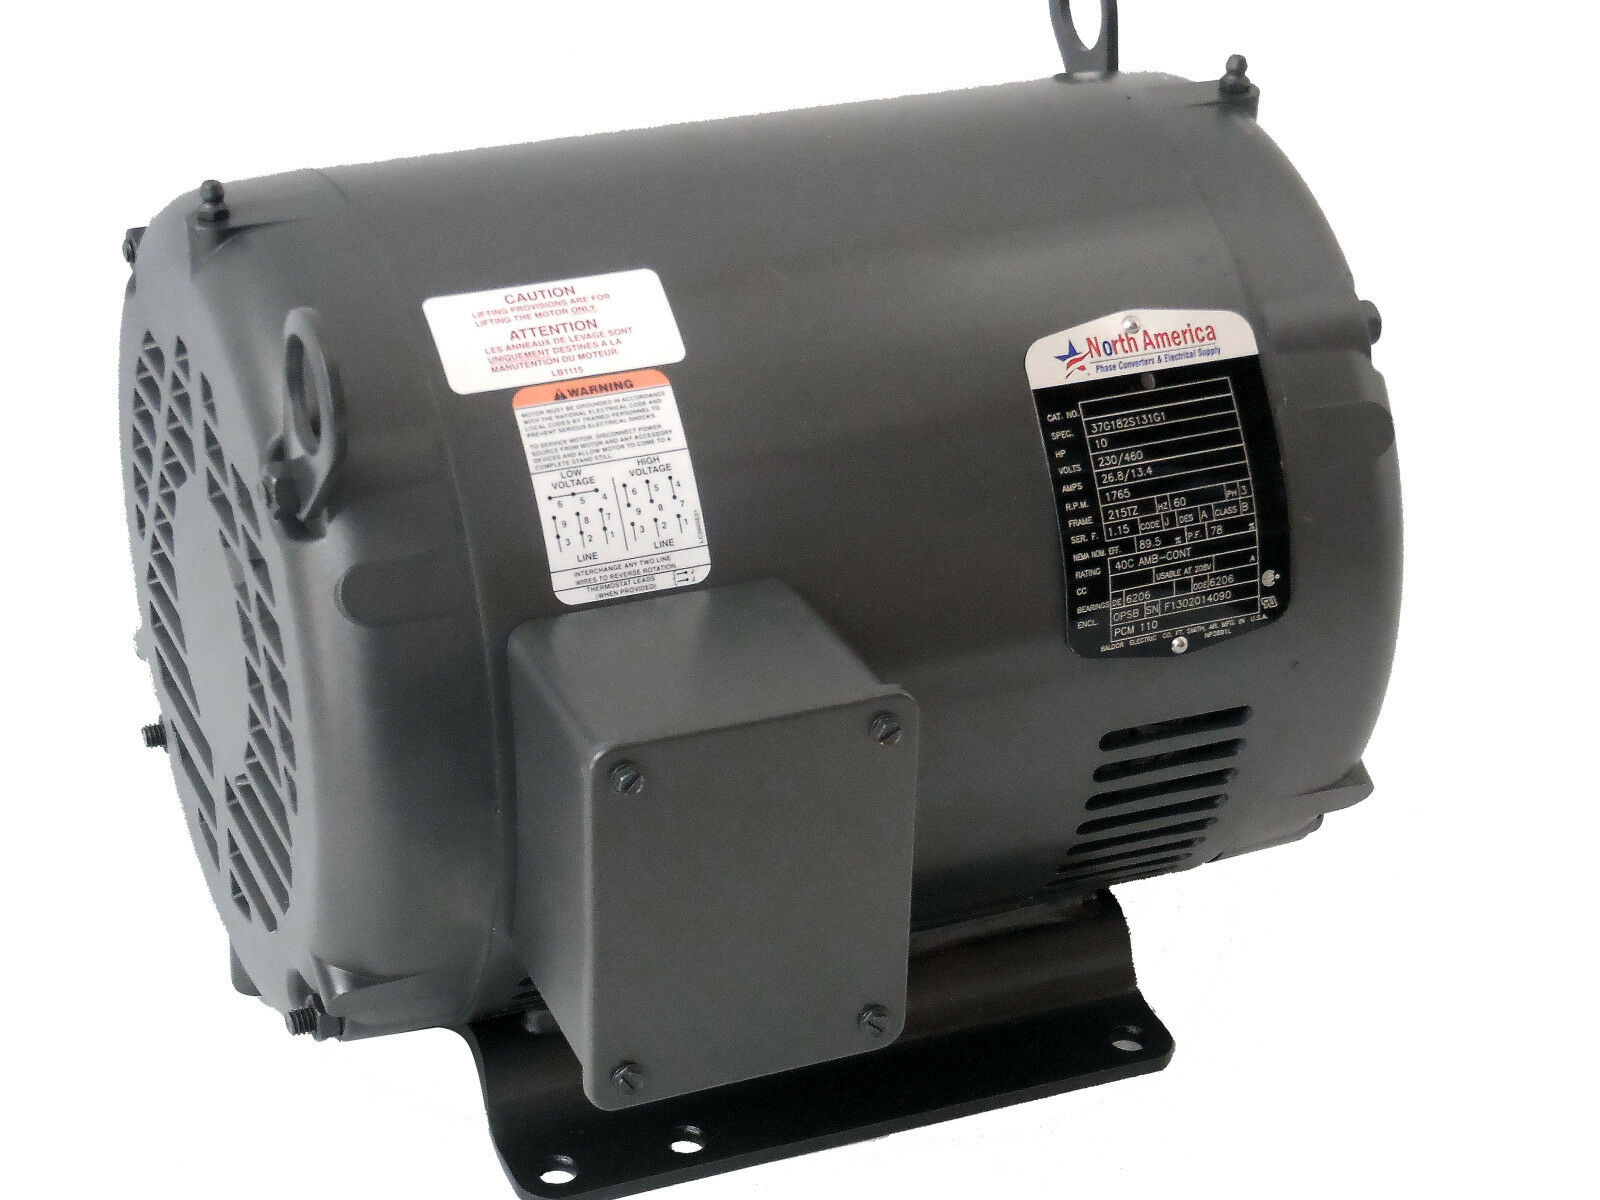 25HP UL-Listed Rotary Phase Converter - Model UL-25 - NEW, FREE SHIPPING